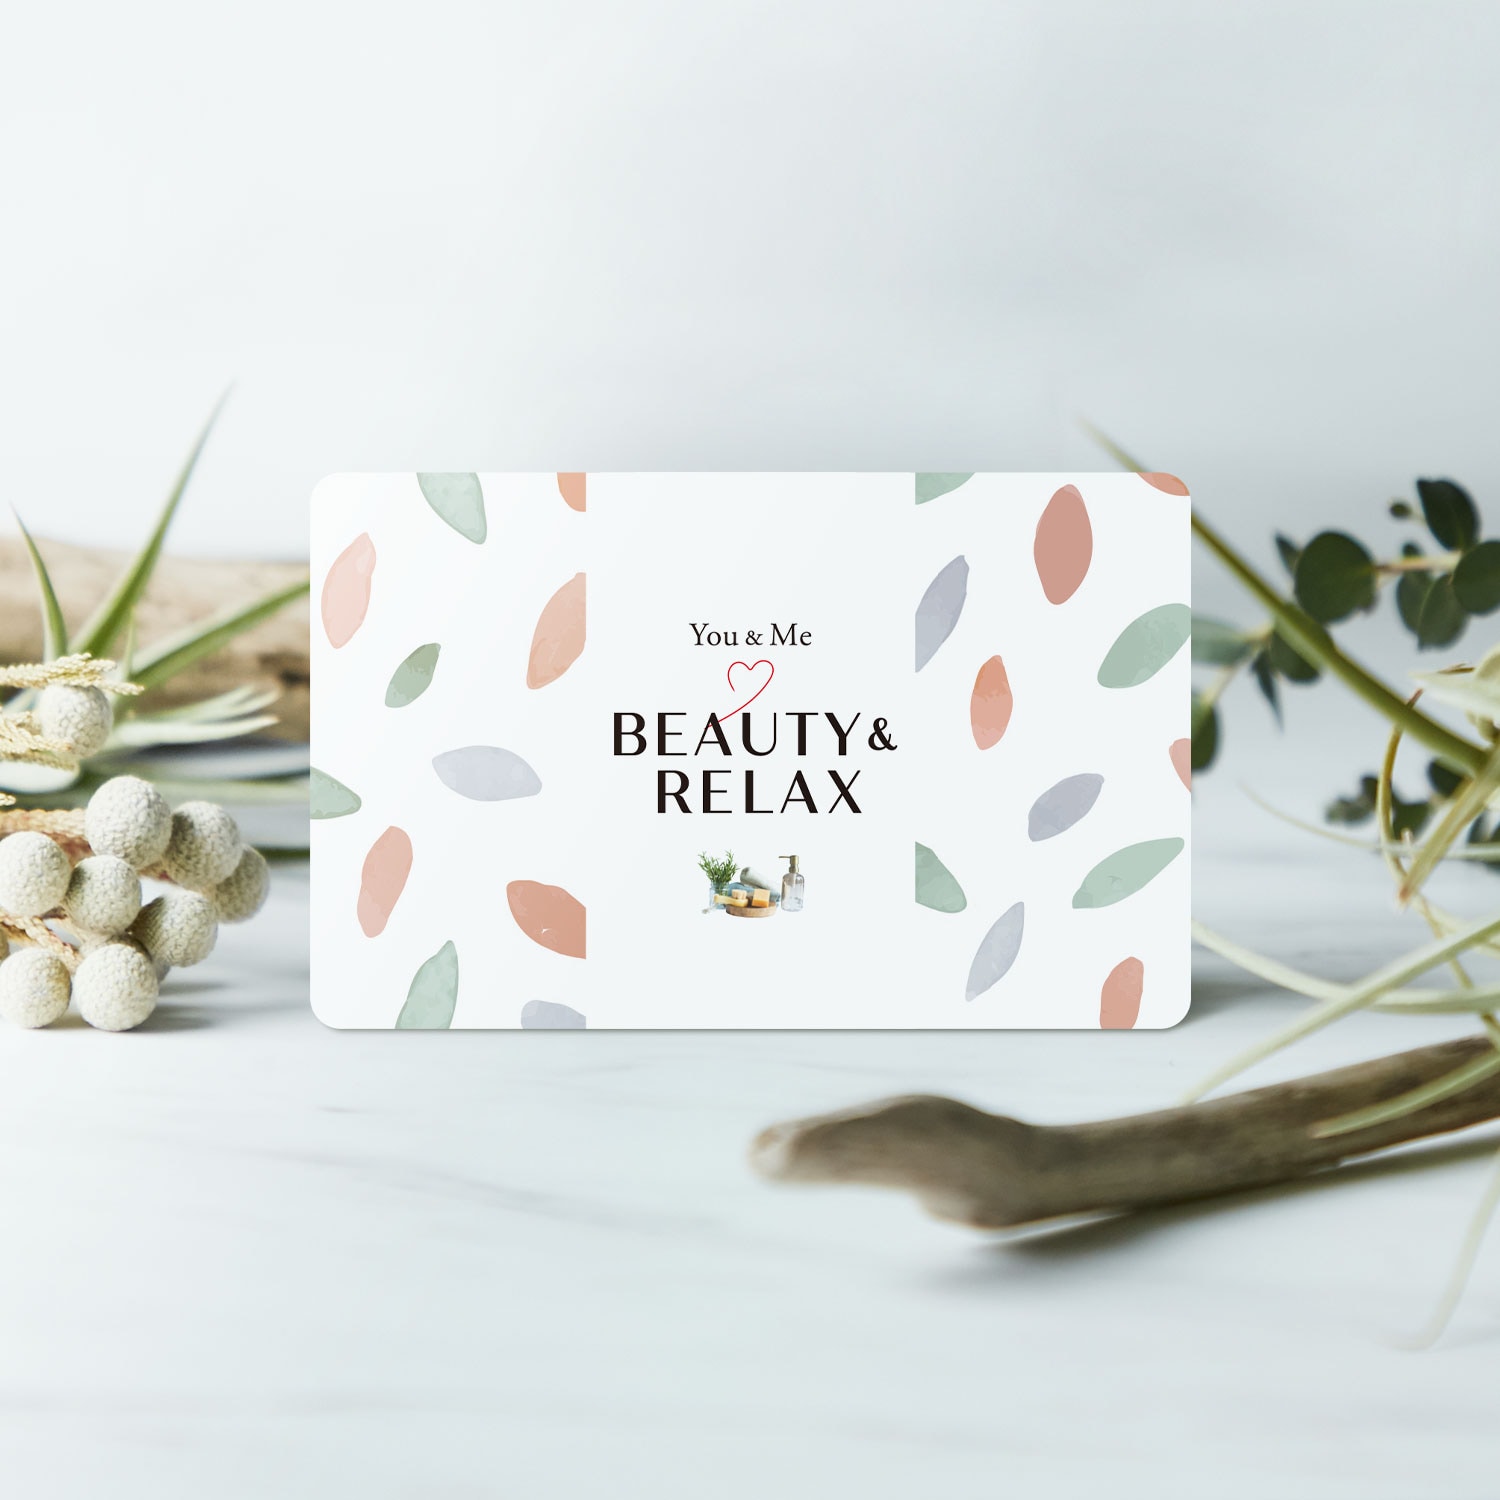 【You & Me】【送料無料】 【カードギフト】こころ、ととのう ご褒美ギフトカード「You & Me Beauty & Relax」BE